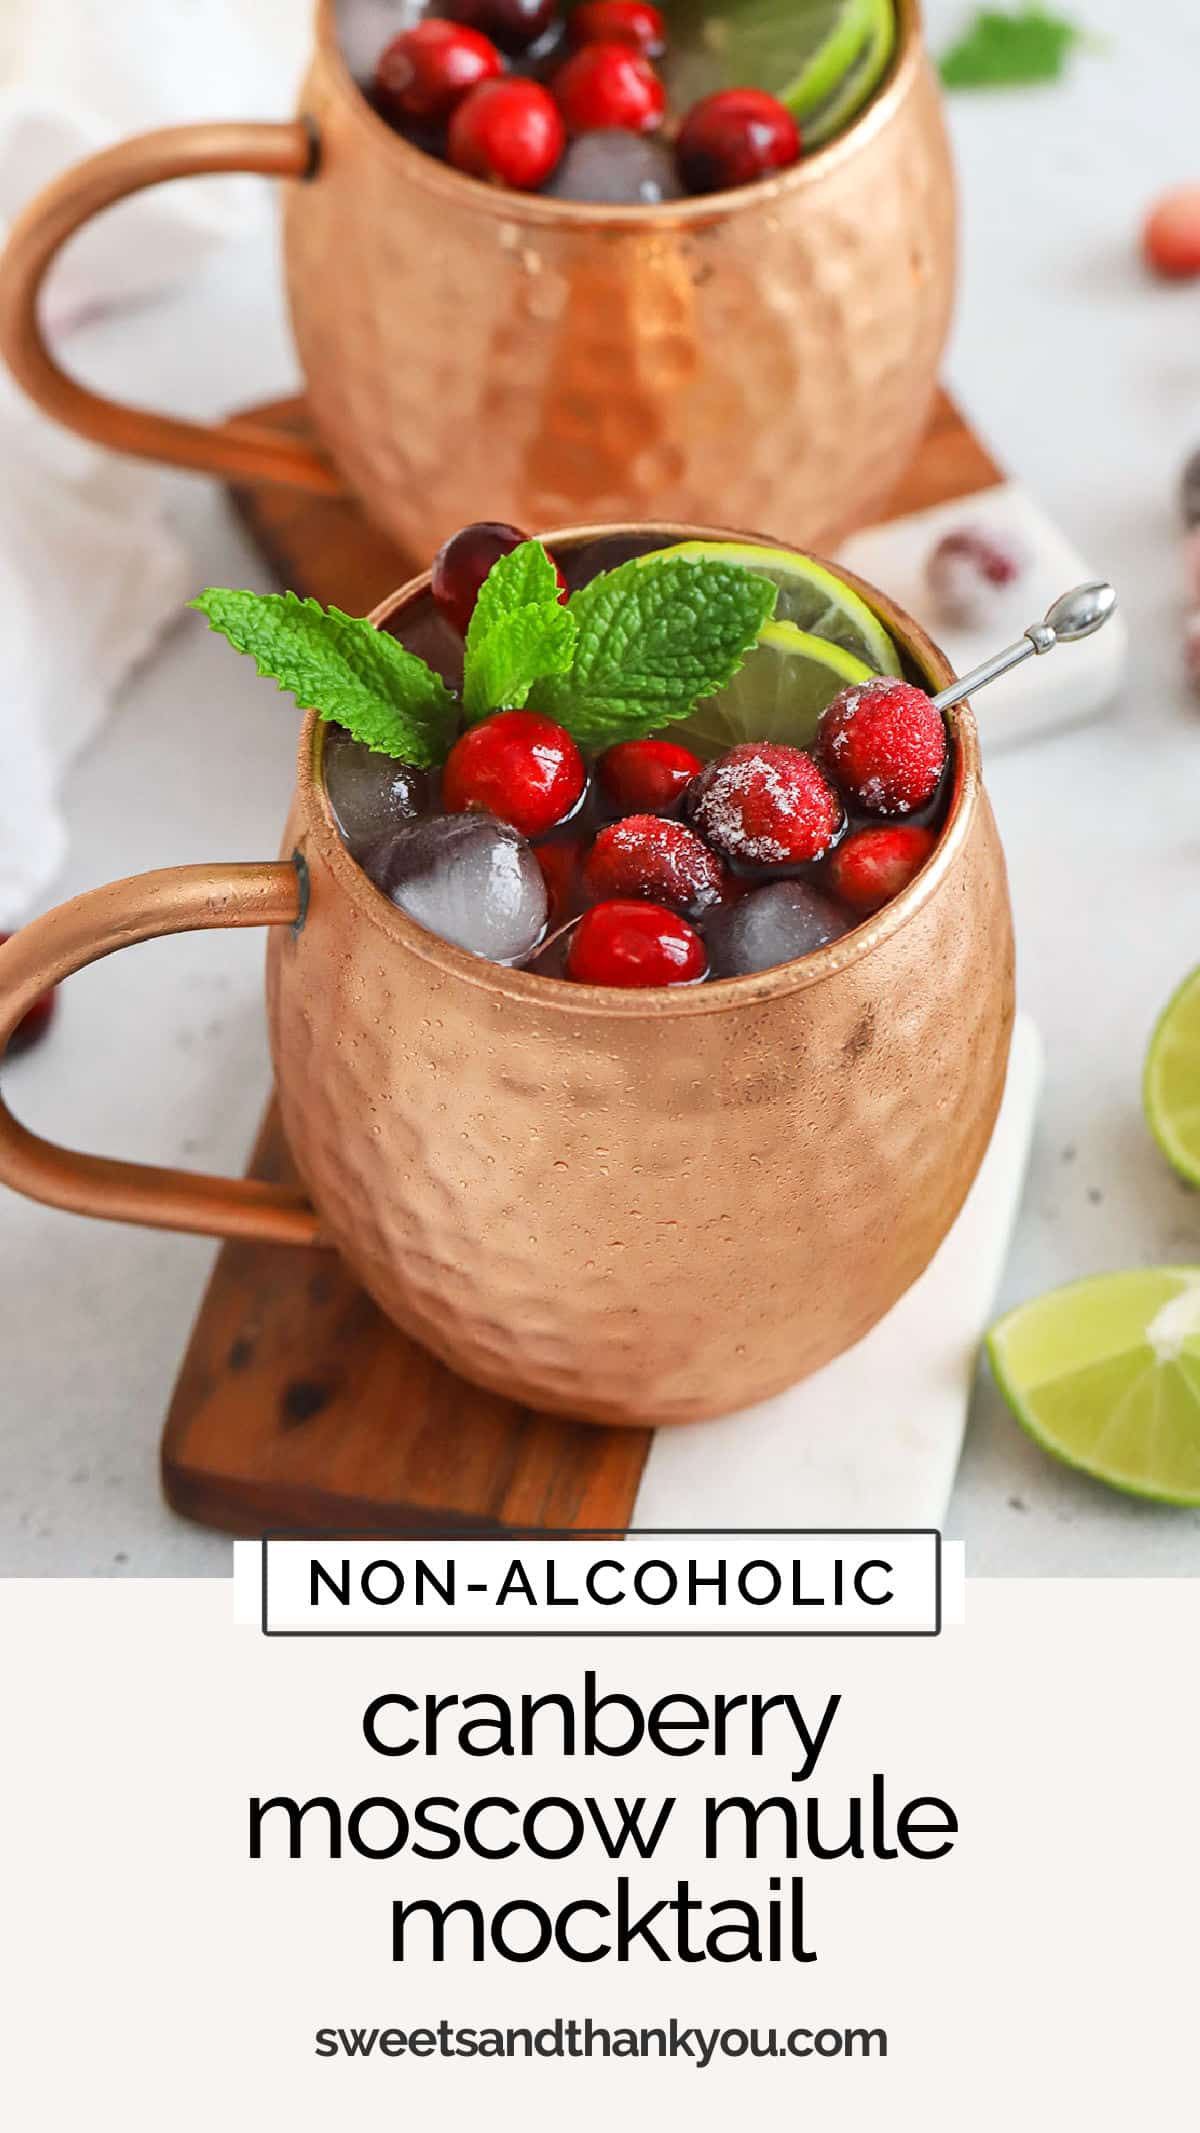 Our festive Cranberry Moscow Mule Mocktail recipe is a perfect holiday drink. With a fizzy mix of fresh & warm flavors and fun seasonal colors, it's the perfect holiday mocktail recipe!

non-alcoholic holiday drinks / cranberry mocktail recipe / moscow mule mocktail / cranberry drink / holiday drink recipe / non alcoholic holiday drink recipe / christmas mocktail / thanksgiving mocktail / red mocktail